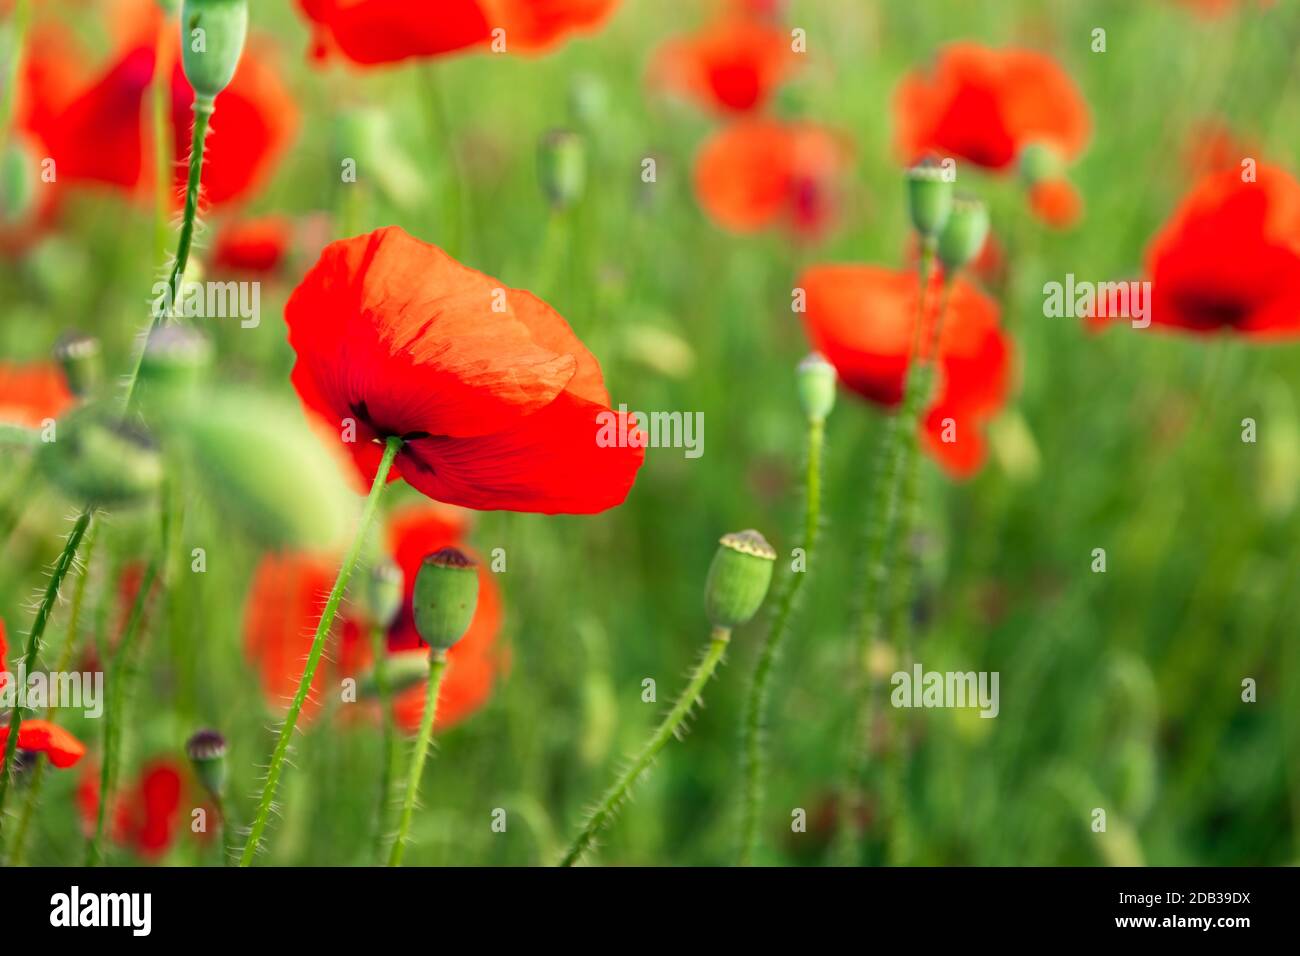 green meadow with red poppy flowers Stock Photo